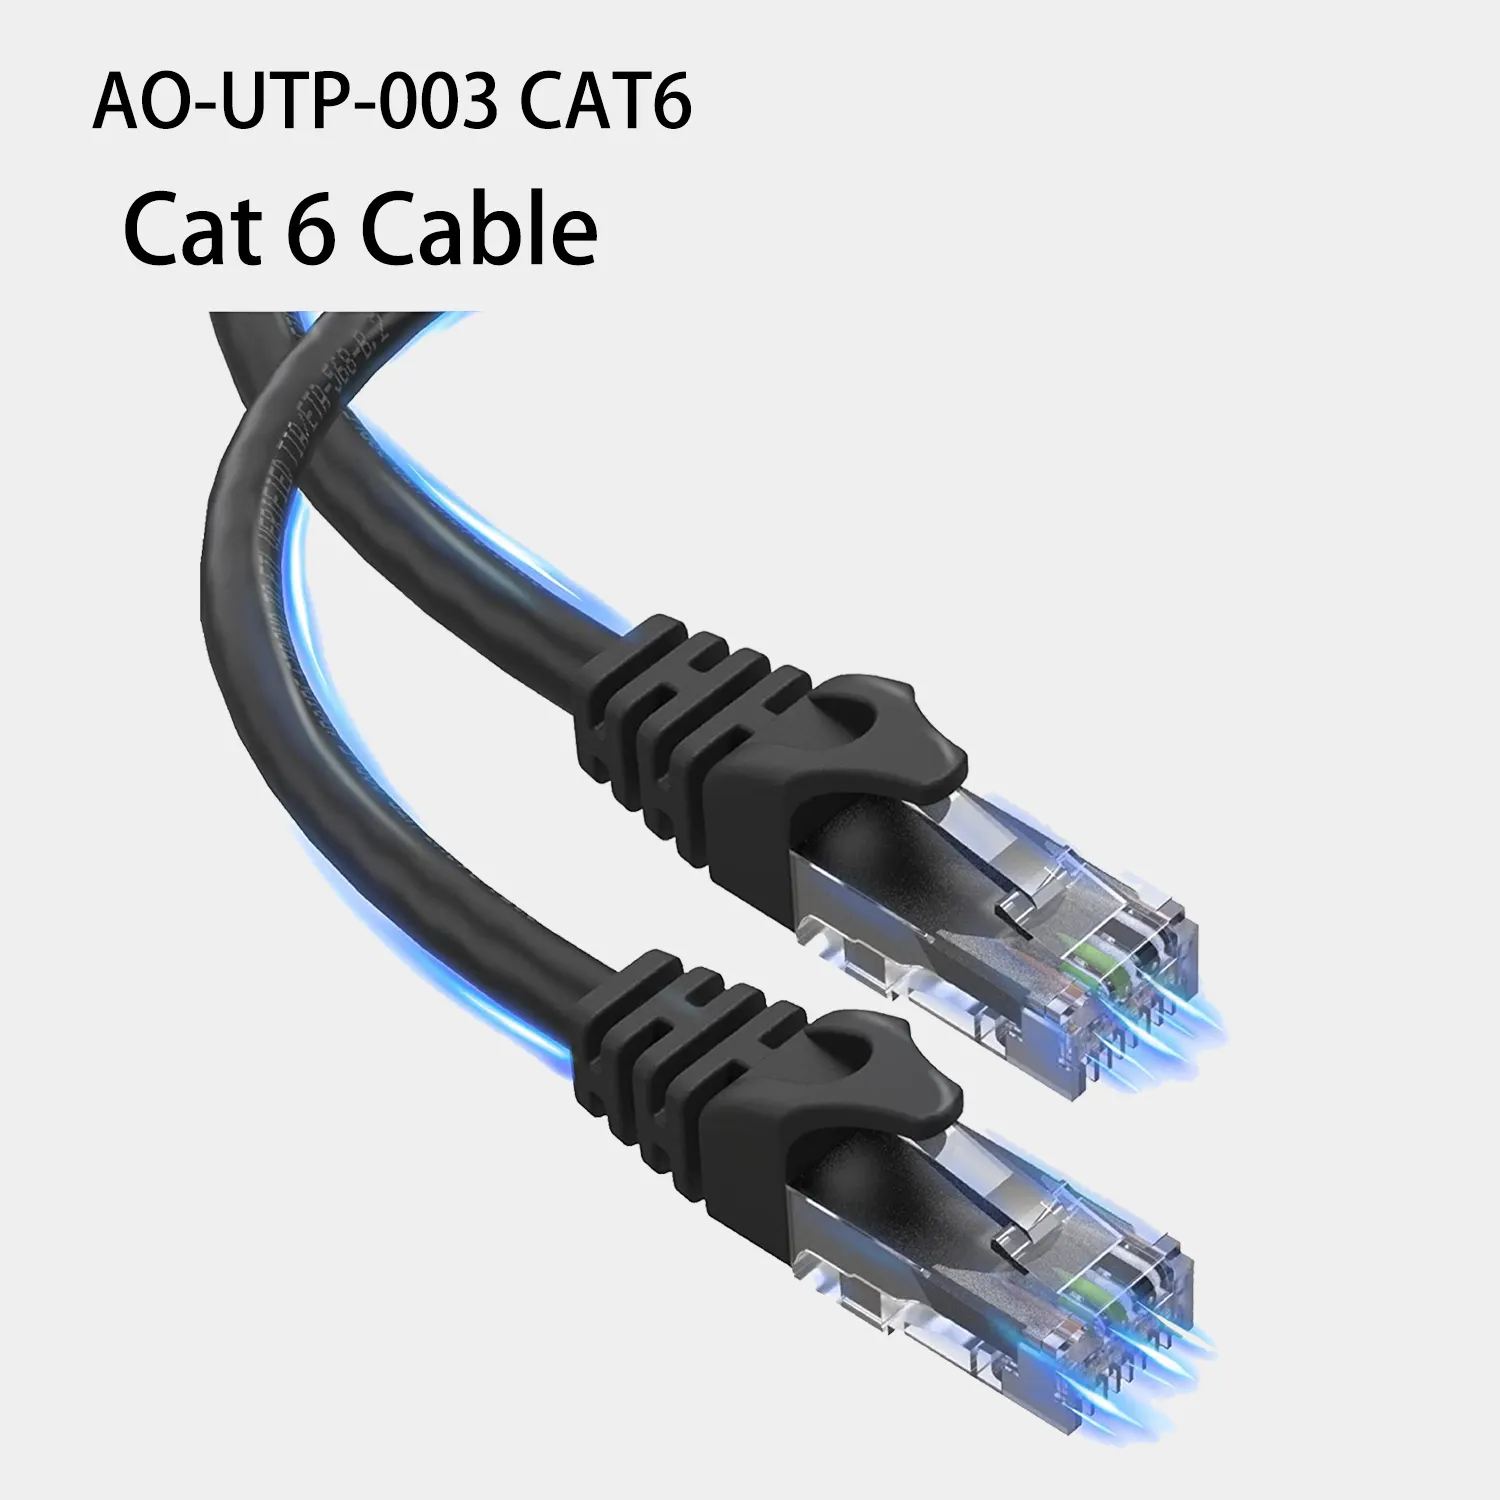 CAT6 Ethernet Cable LAN UTP CAT 6 RJ45 Network Patch Internet Cable for Modem Router Gaming PC